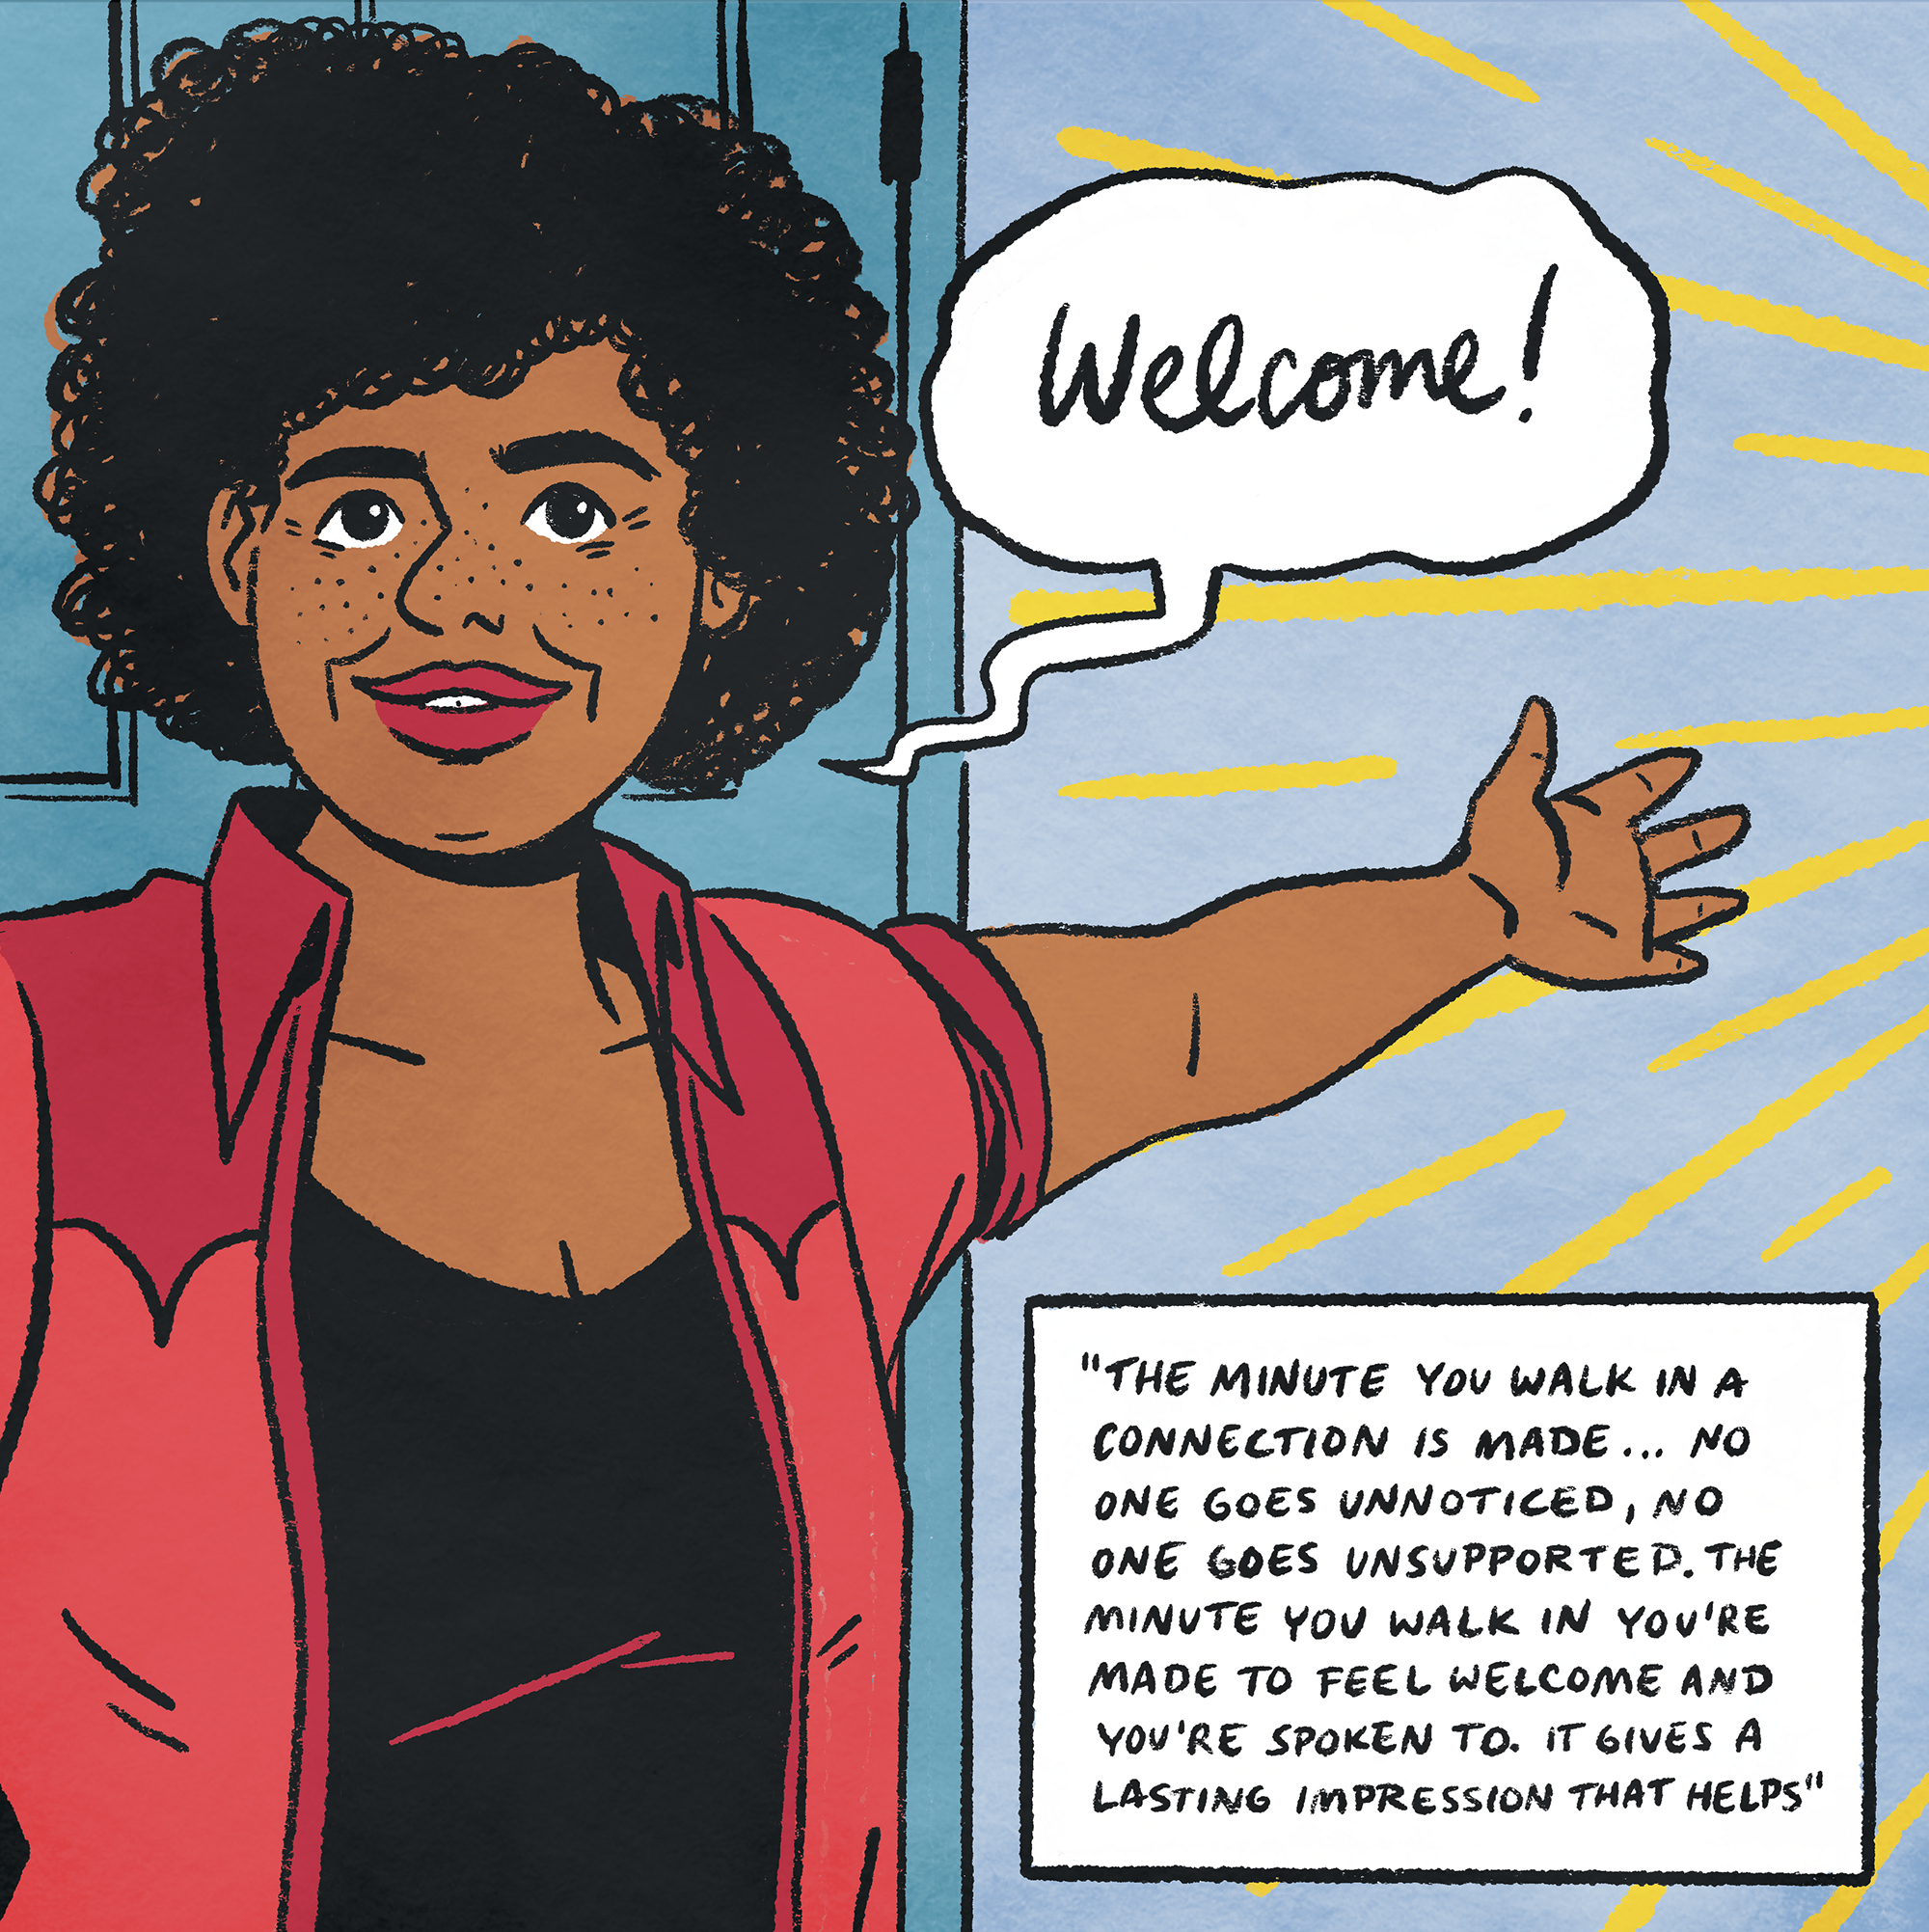 Description: Colour illustration of a woman with her arm outstretched and a smile. A speech bubble says “Welcome”. There is a text box in the bottom right which reads “The minute you walk in a connection is made… no one goes unnoticed, no one goes unsupported. The minute you walk in you’re made to feel welcome and you’re spoken to. It gives a lasting impression that helps.”